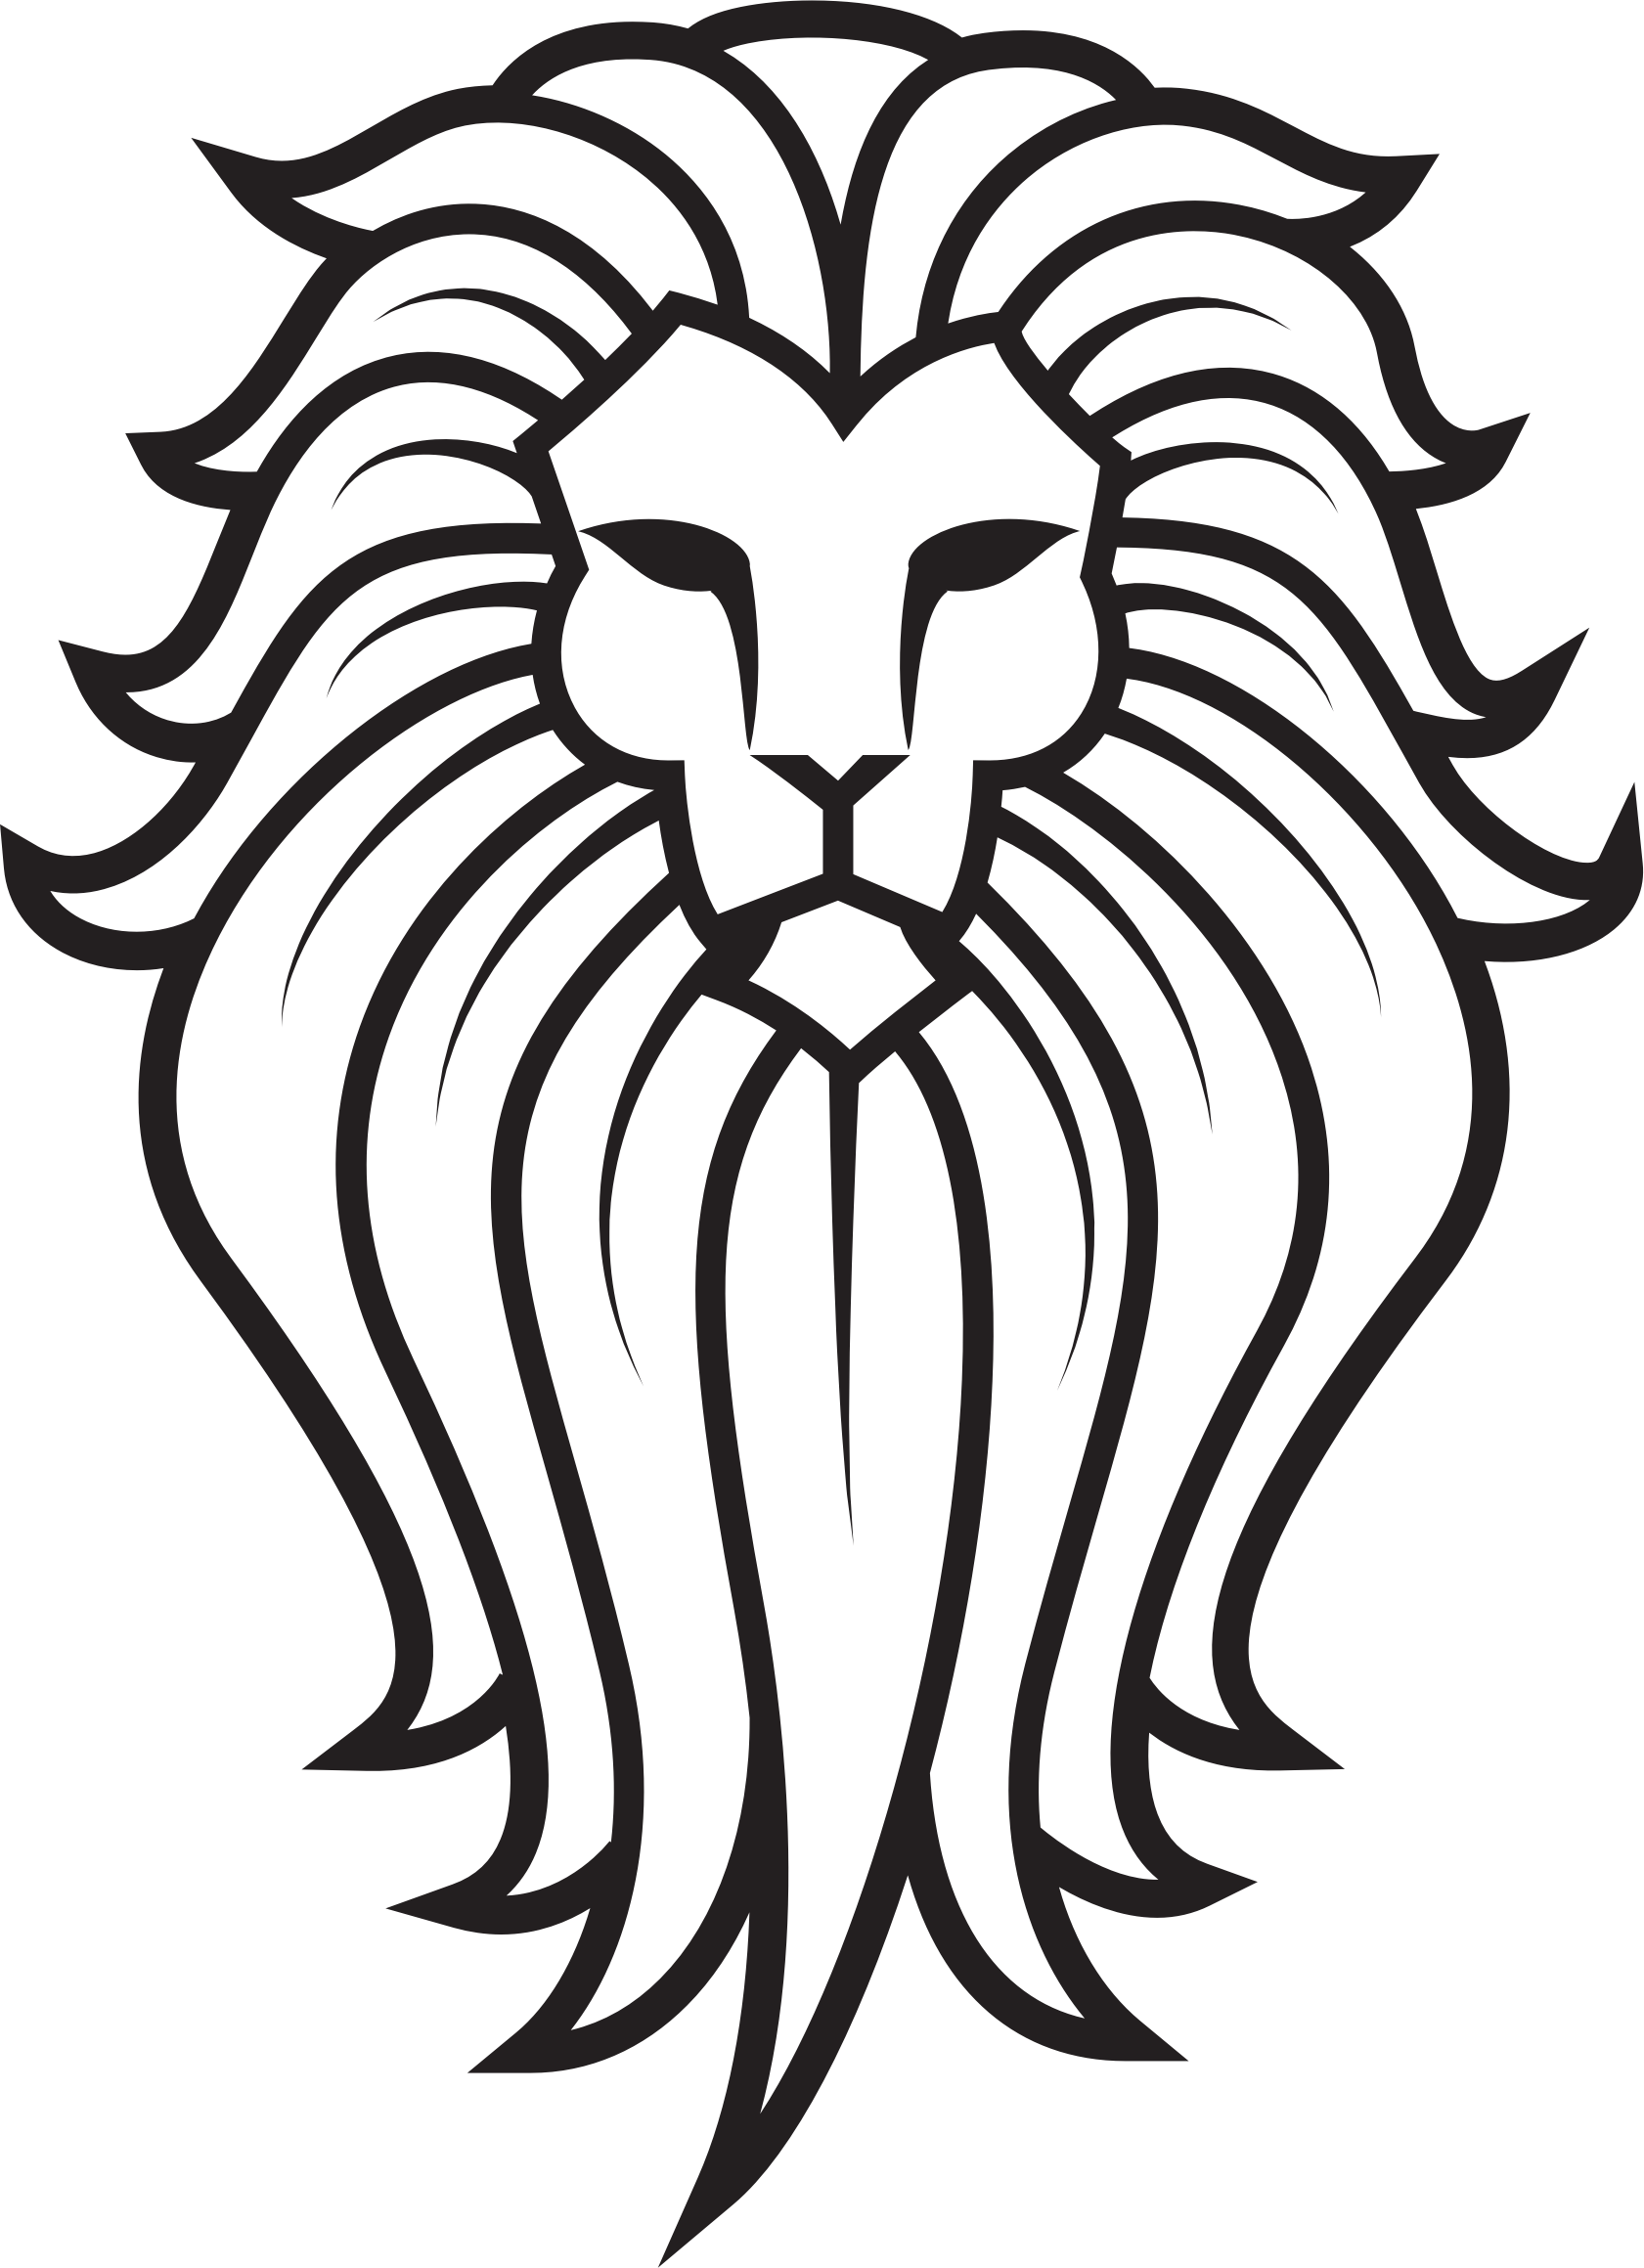 Drawing tattoo at getdrawings. Lion clipart easy